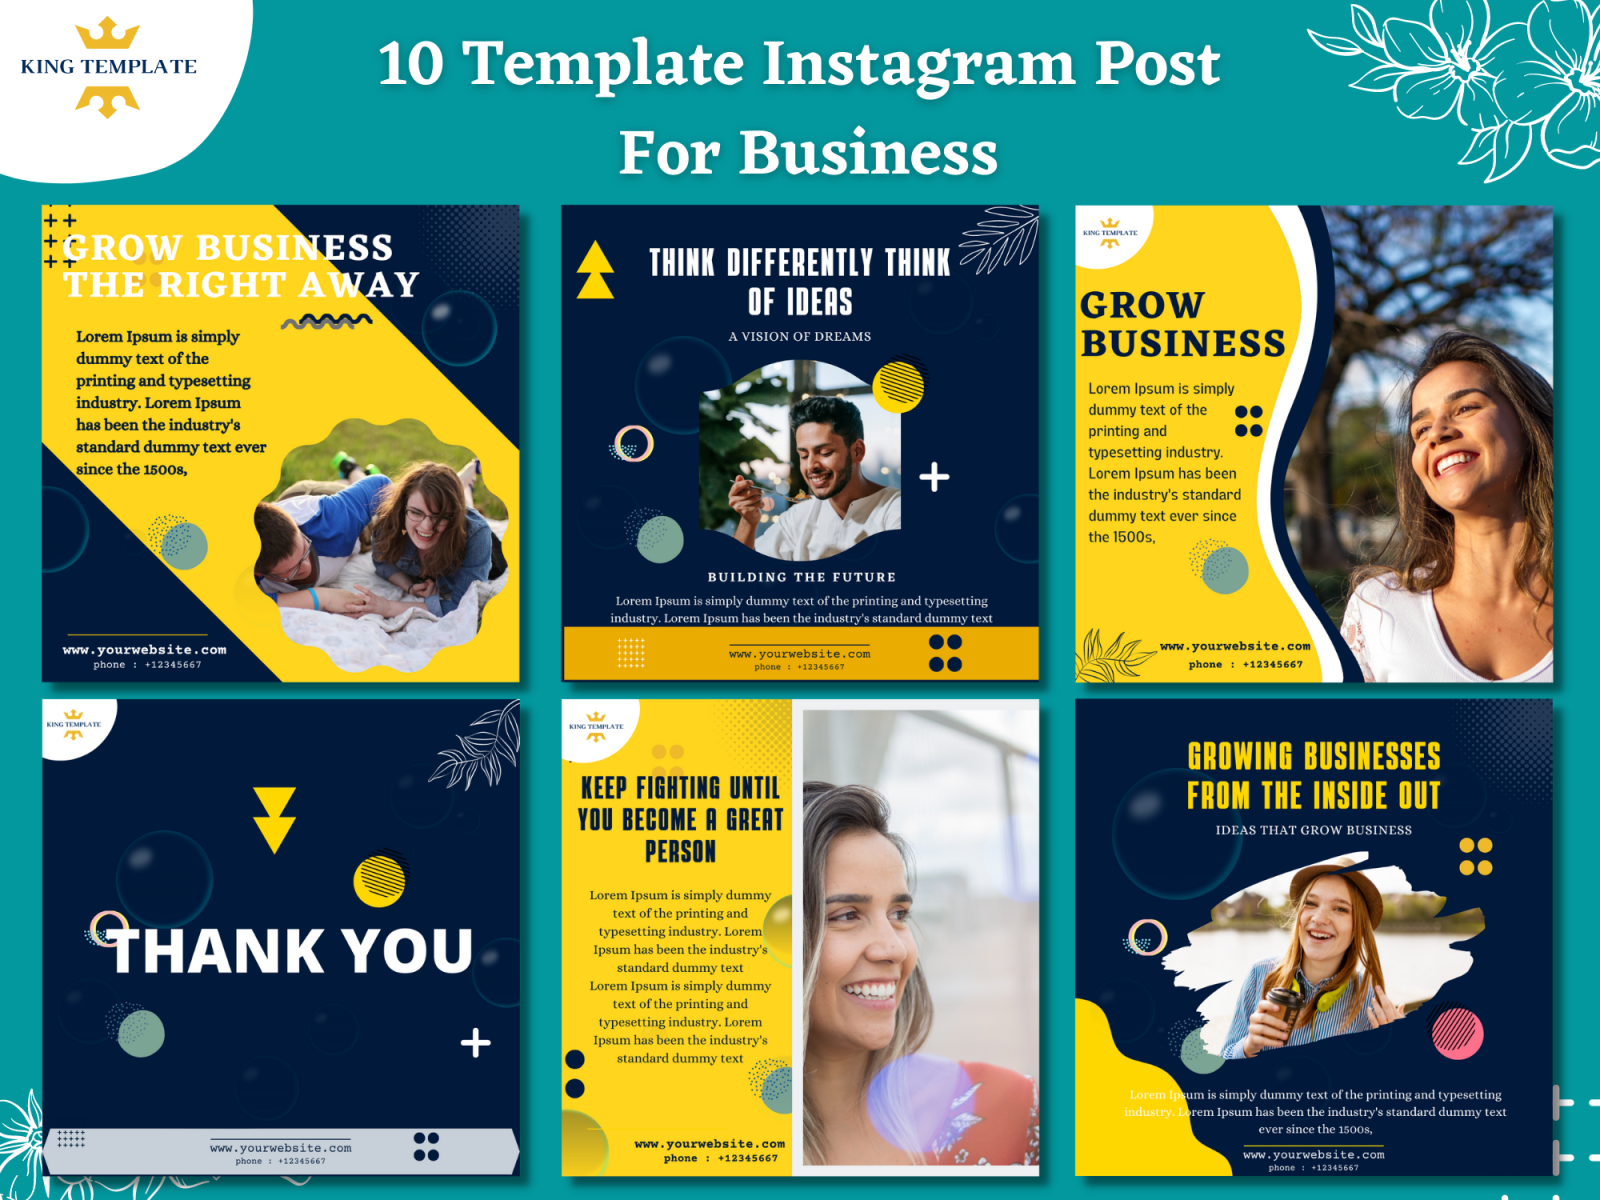 Instagram Template For Business by Muhammad Nur Ismail on Dribbble